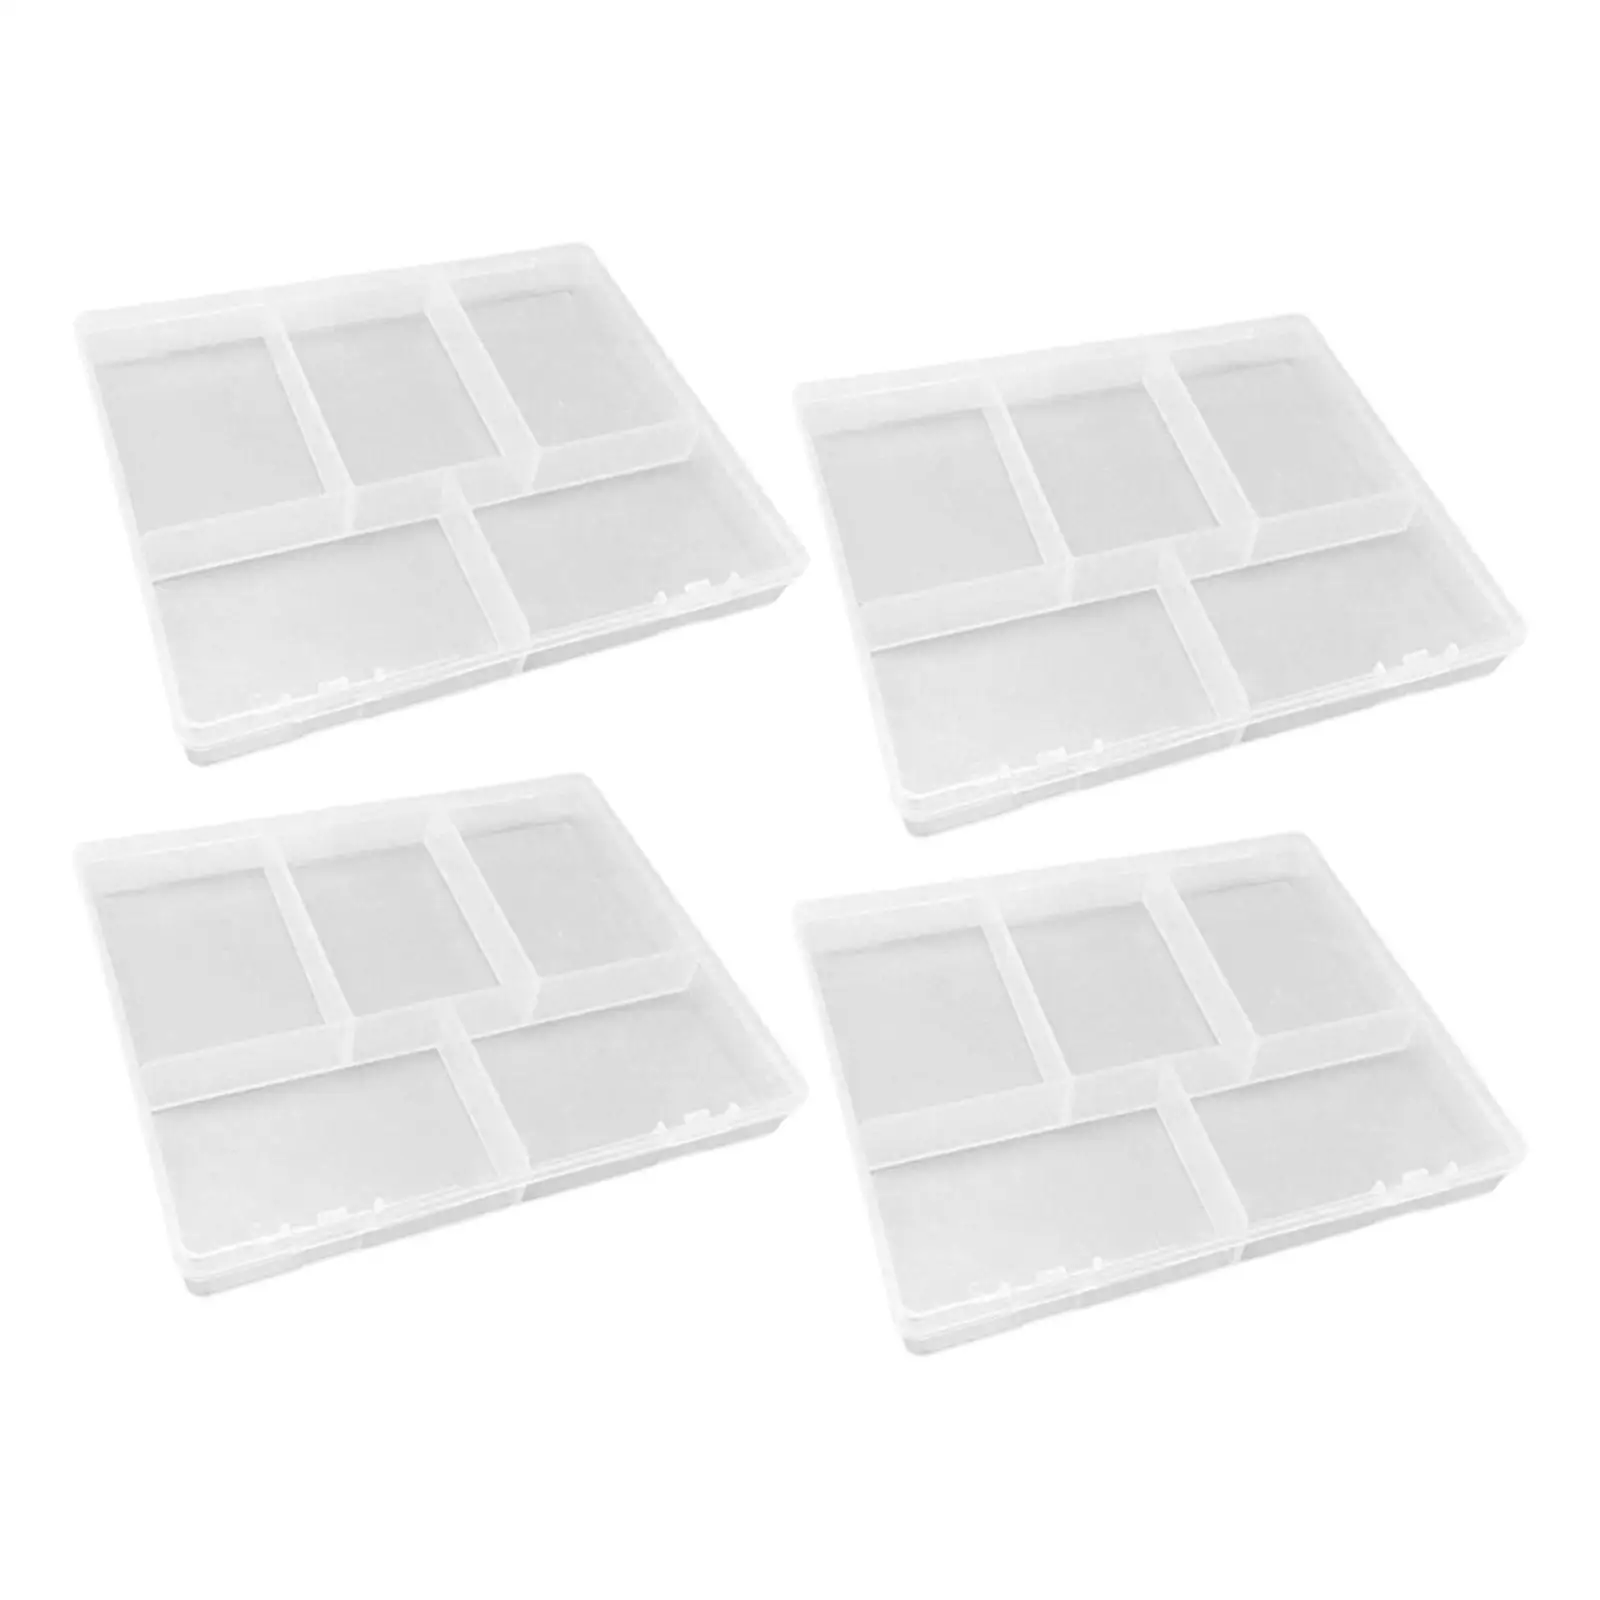 4 Pieces Small Storage Box 5 Grid for Tools Painting Accessories